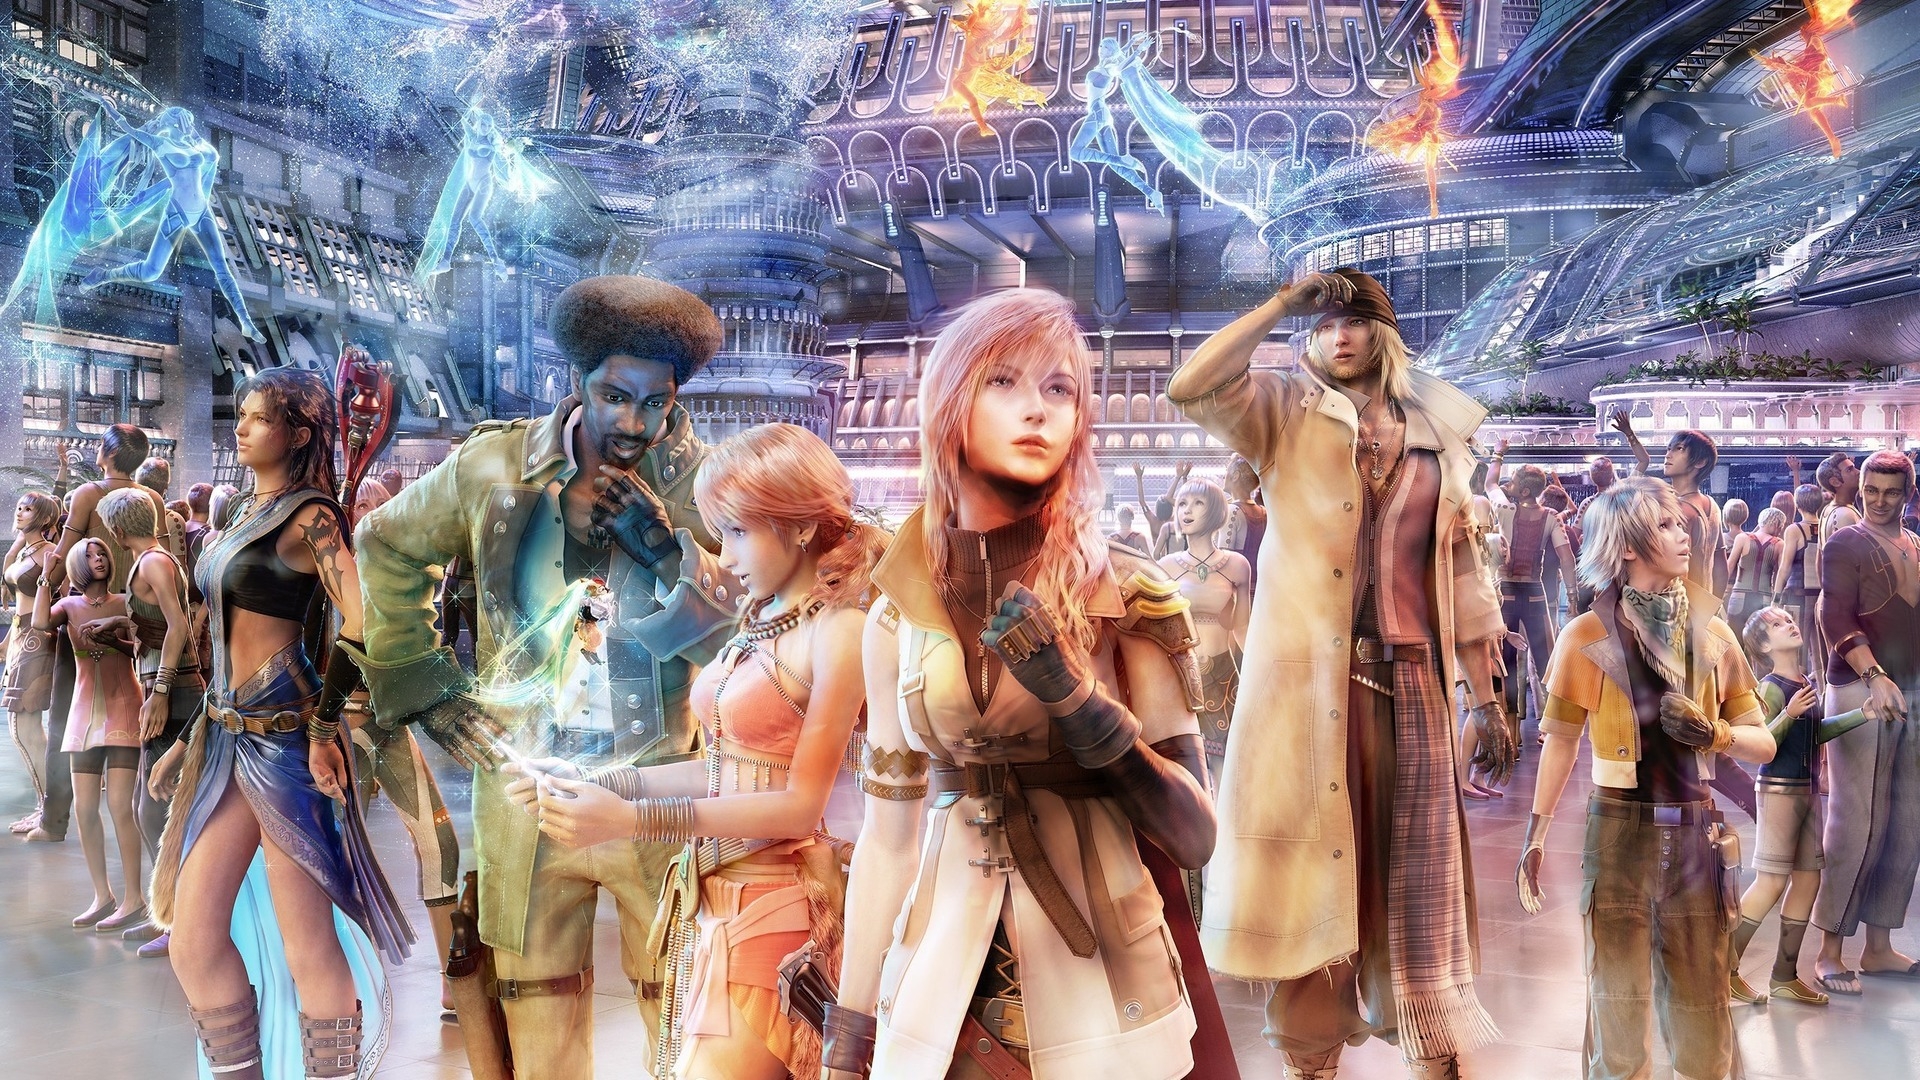 Final Fantasy Video Game for 1920 x 1080 HDTV 1080p resolution